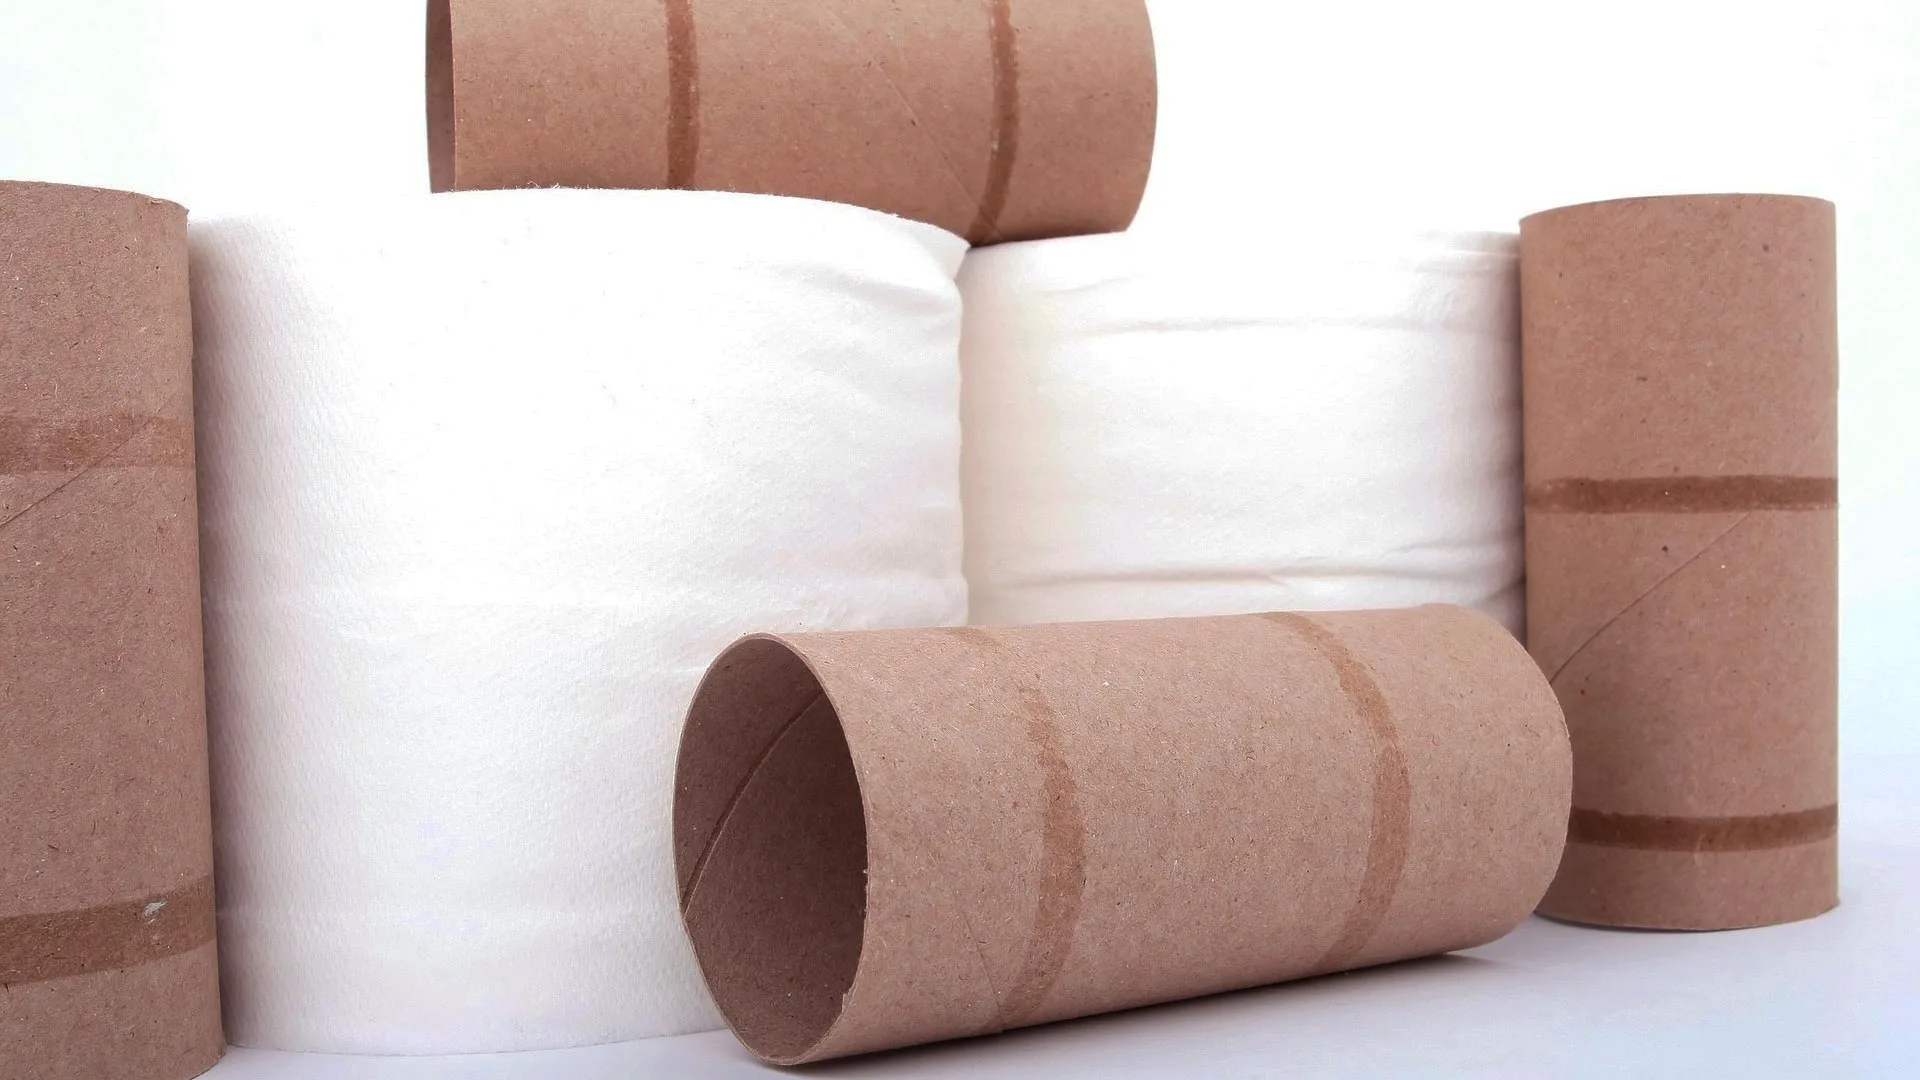 Do You Use More Toilet Paper Than the Average Person?